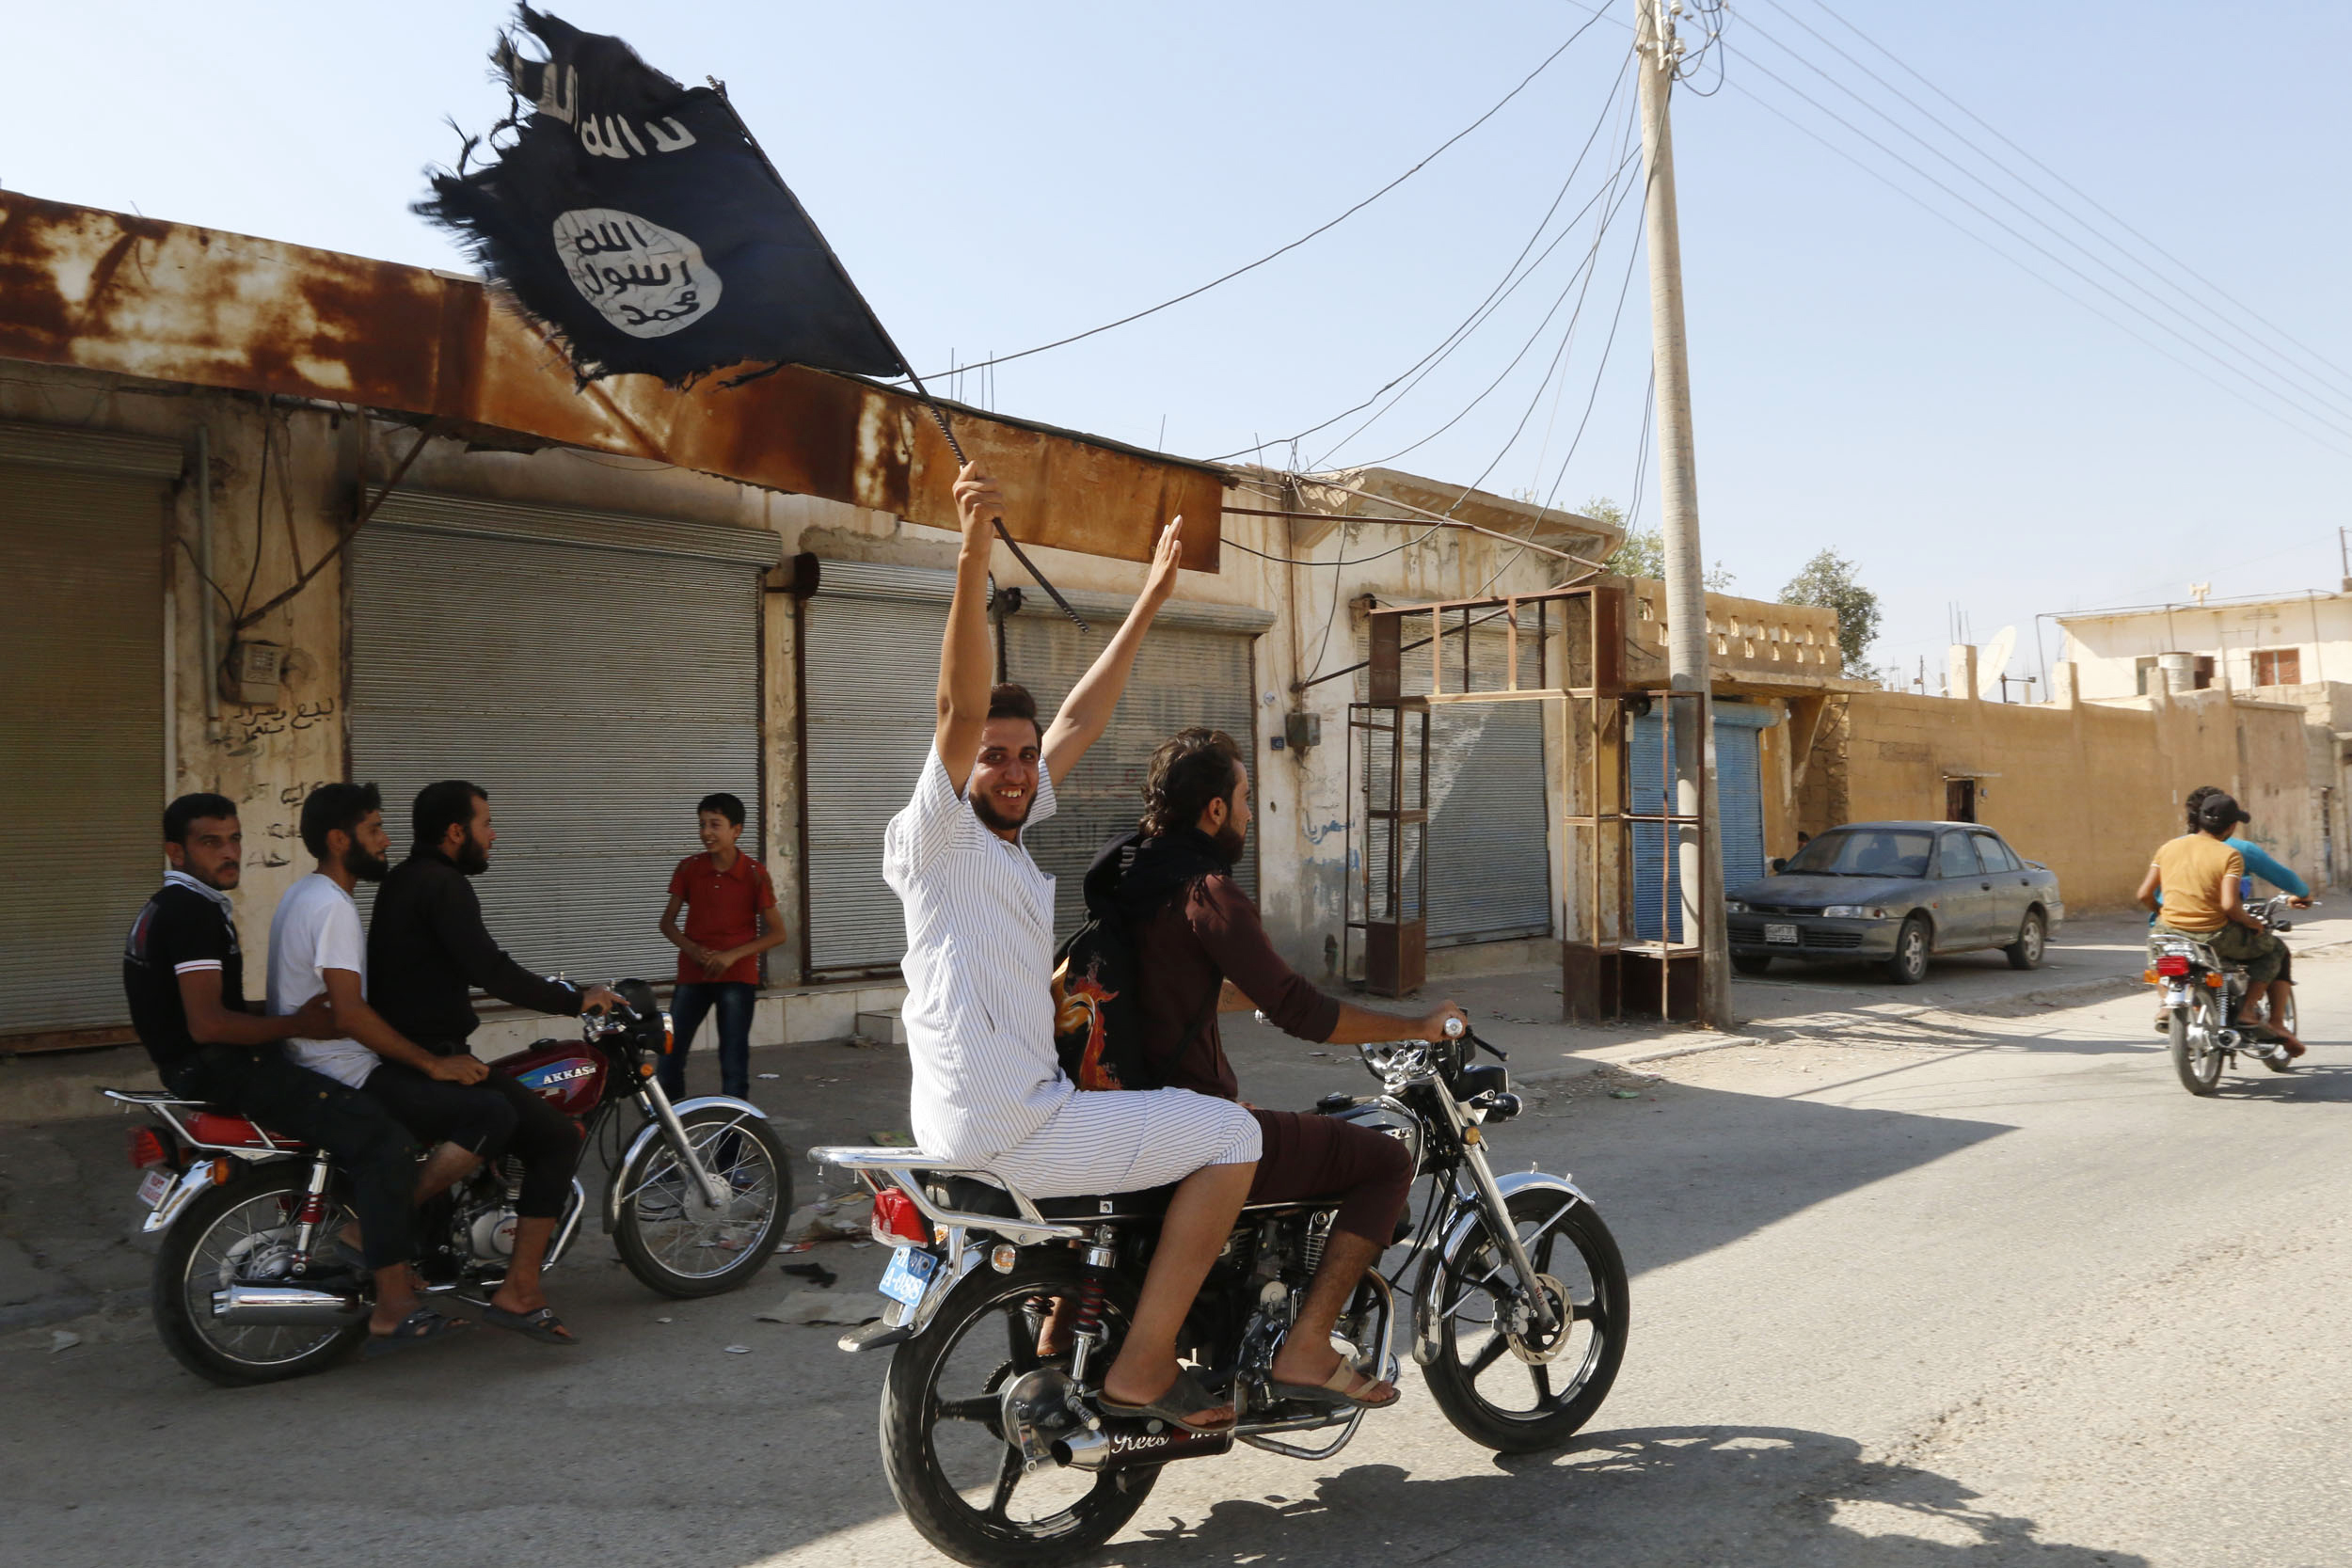 A resident of Tabqa city touring the streets on a motorcycle celebrates after Islamic State of Iraq and Greater Syria militants took over Tabqa air base, in the nearby Syrian city of Raqqa on  Aug. 24, 2014 (Reuters)